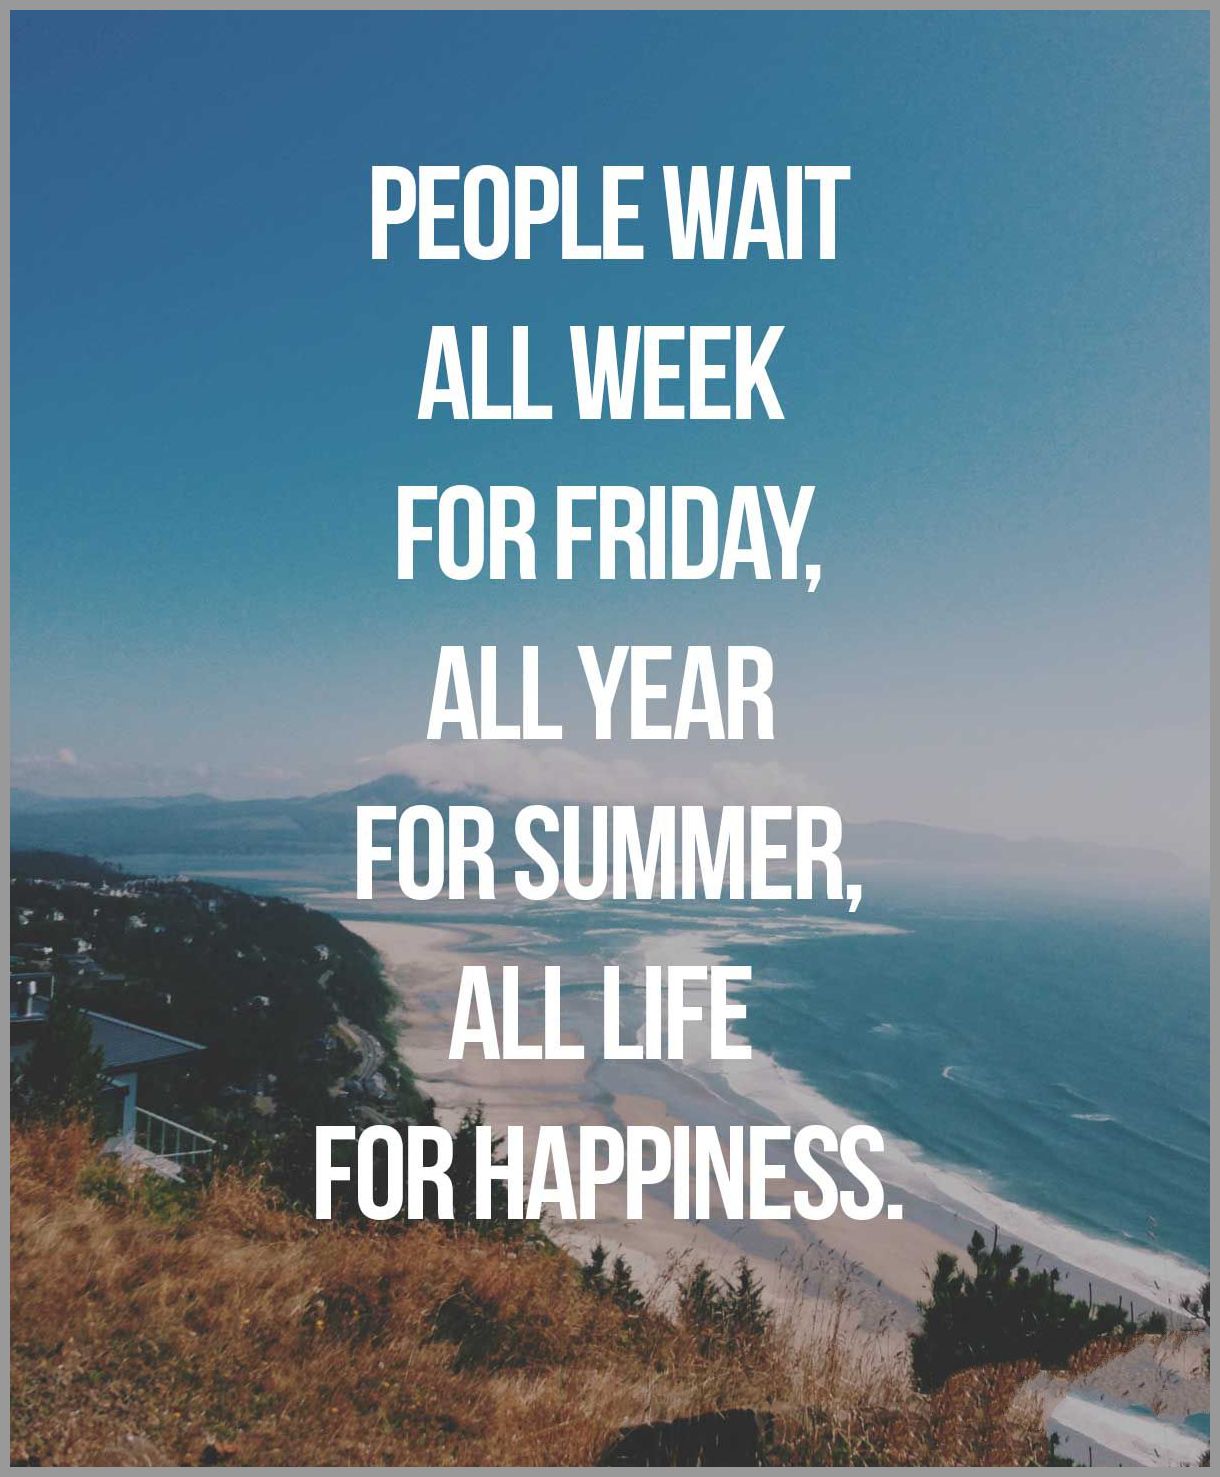 People wait all week for friday all year for summer all life for happiness